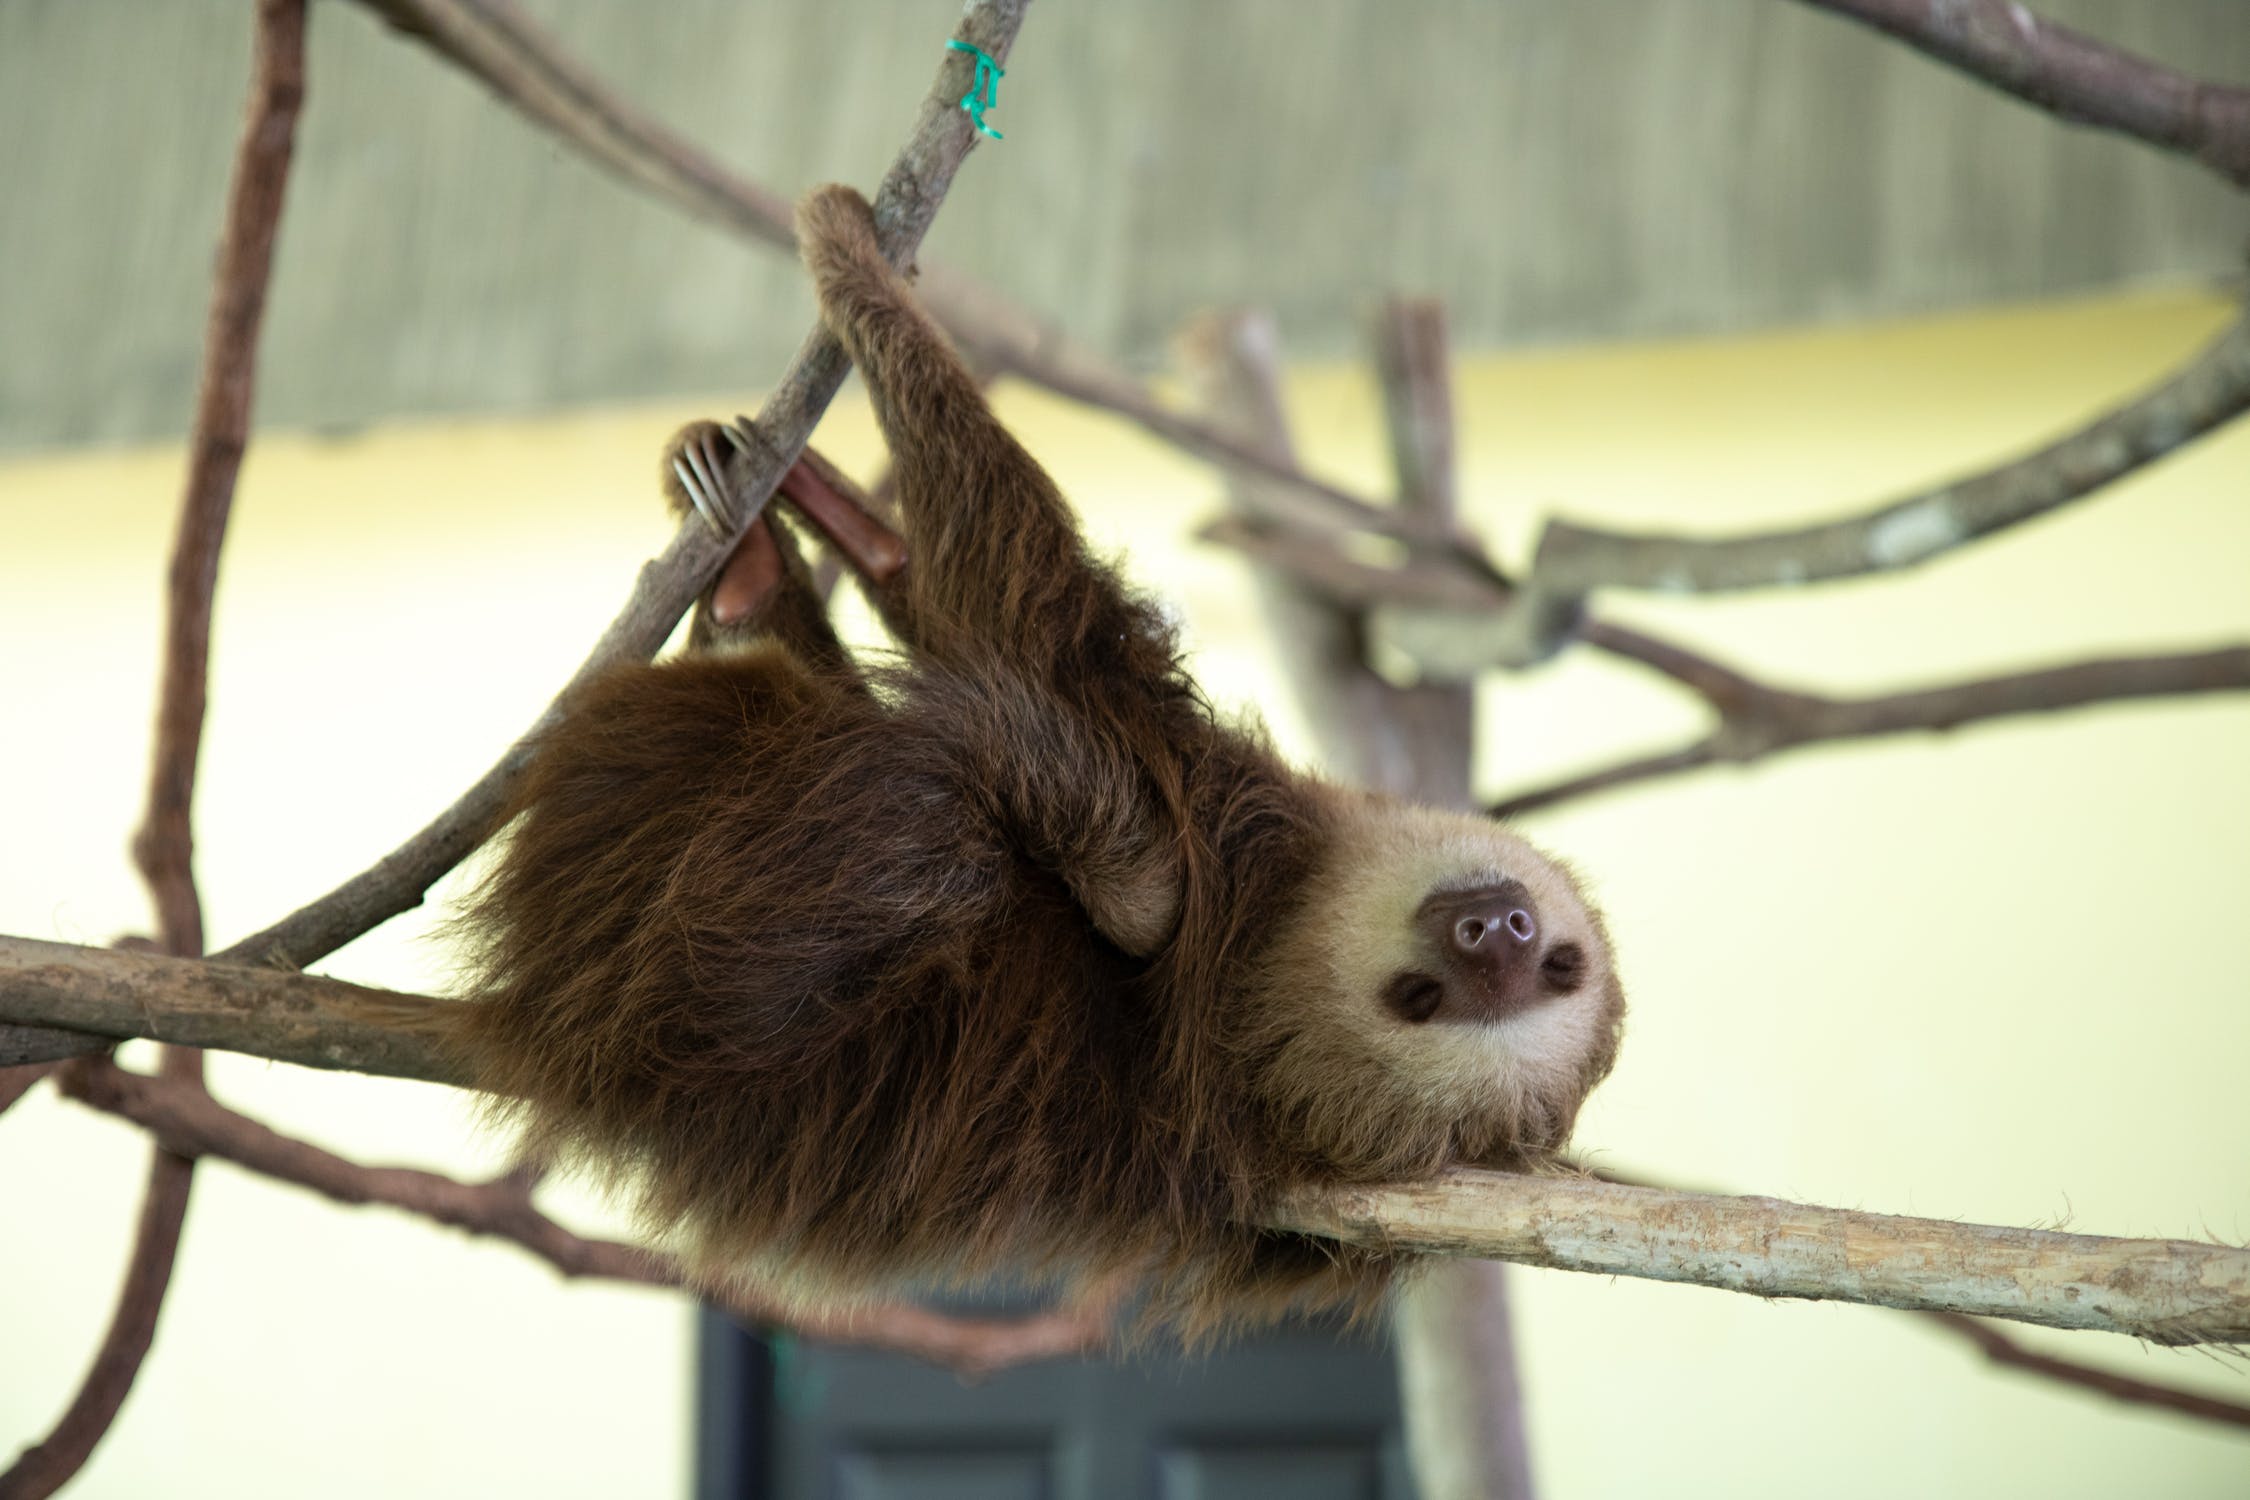 Why Are Sloths Slow?